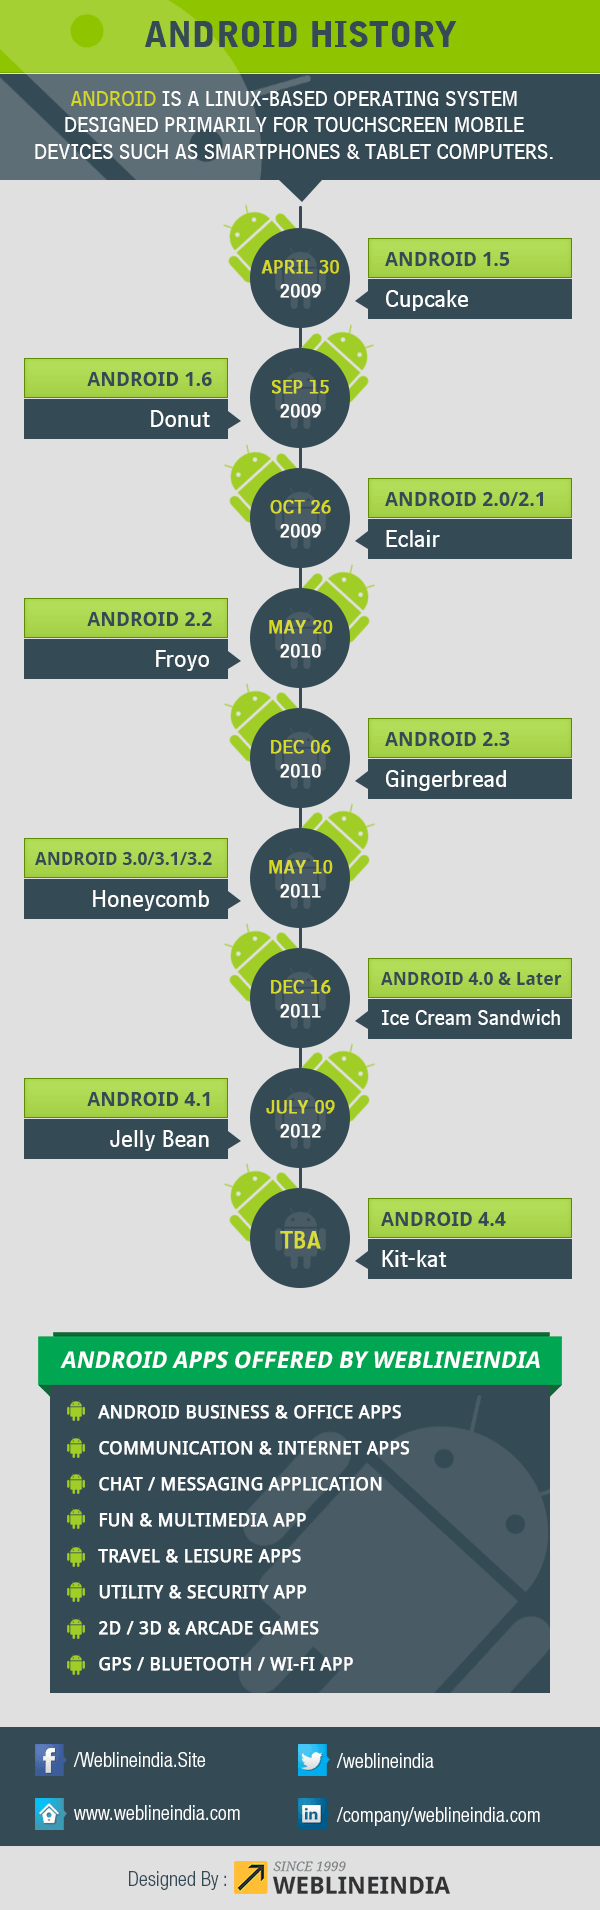 Android OS History Infographic